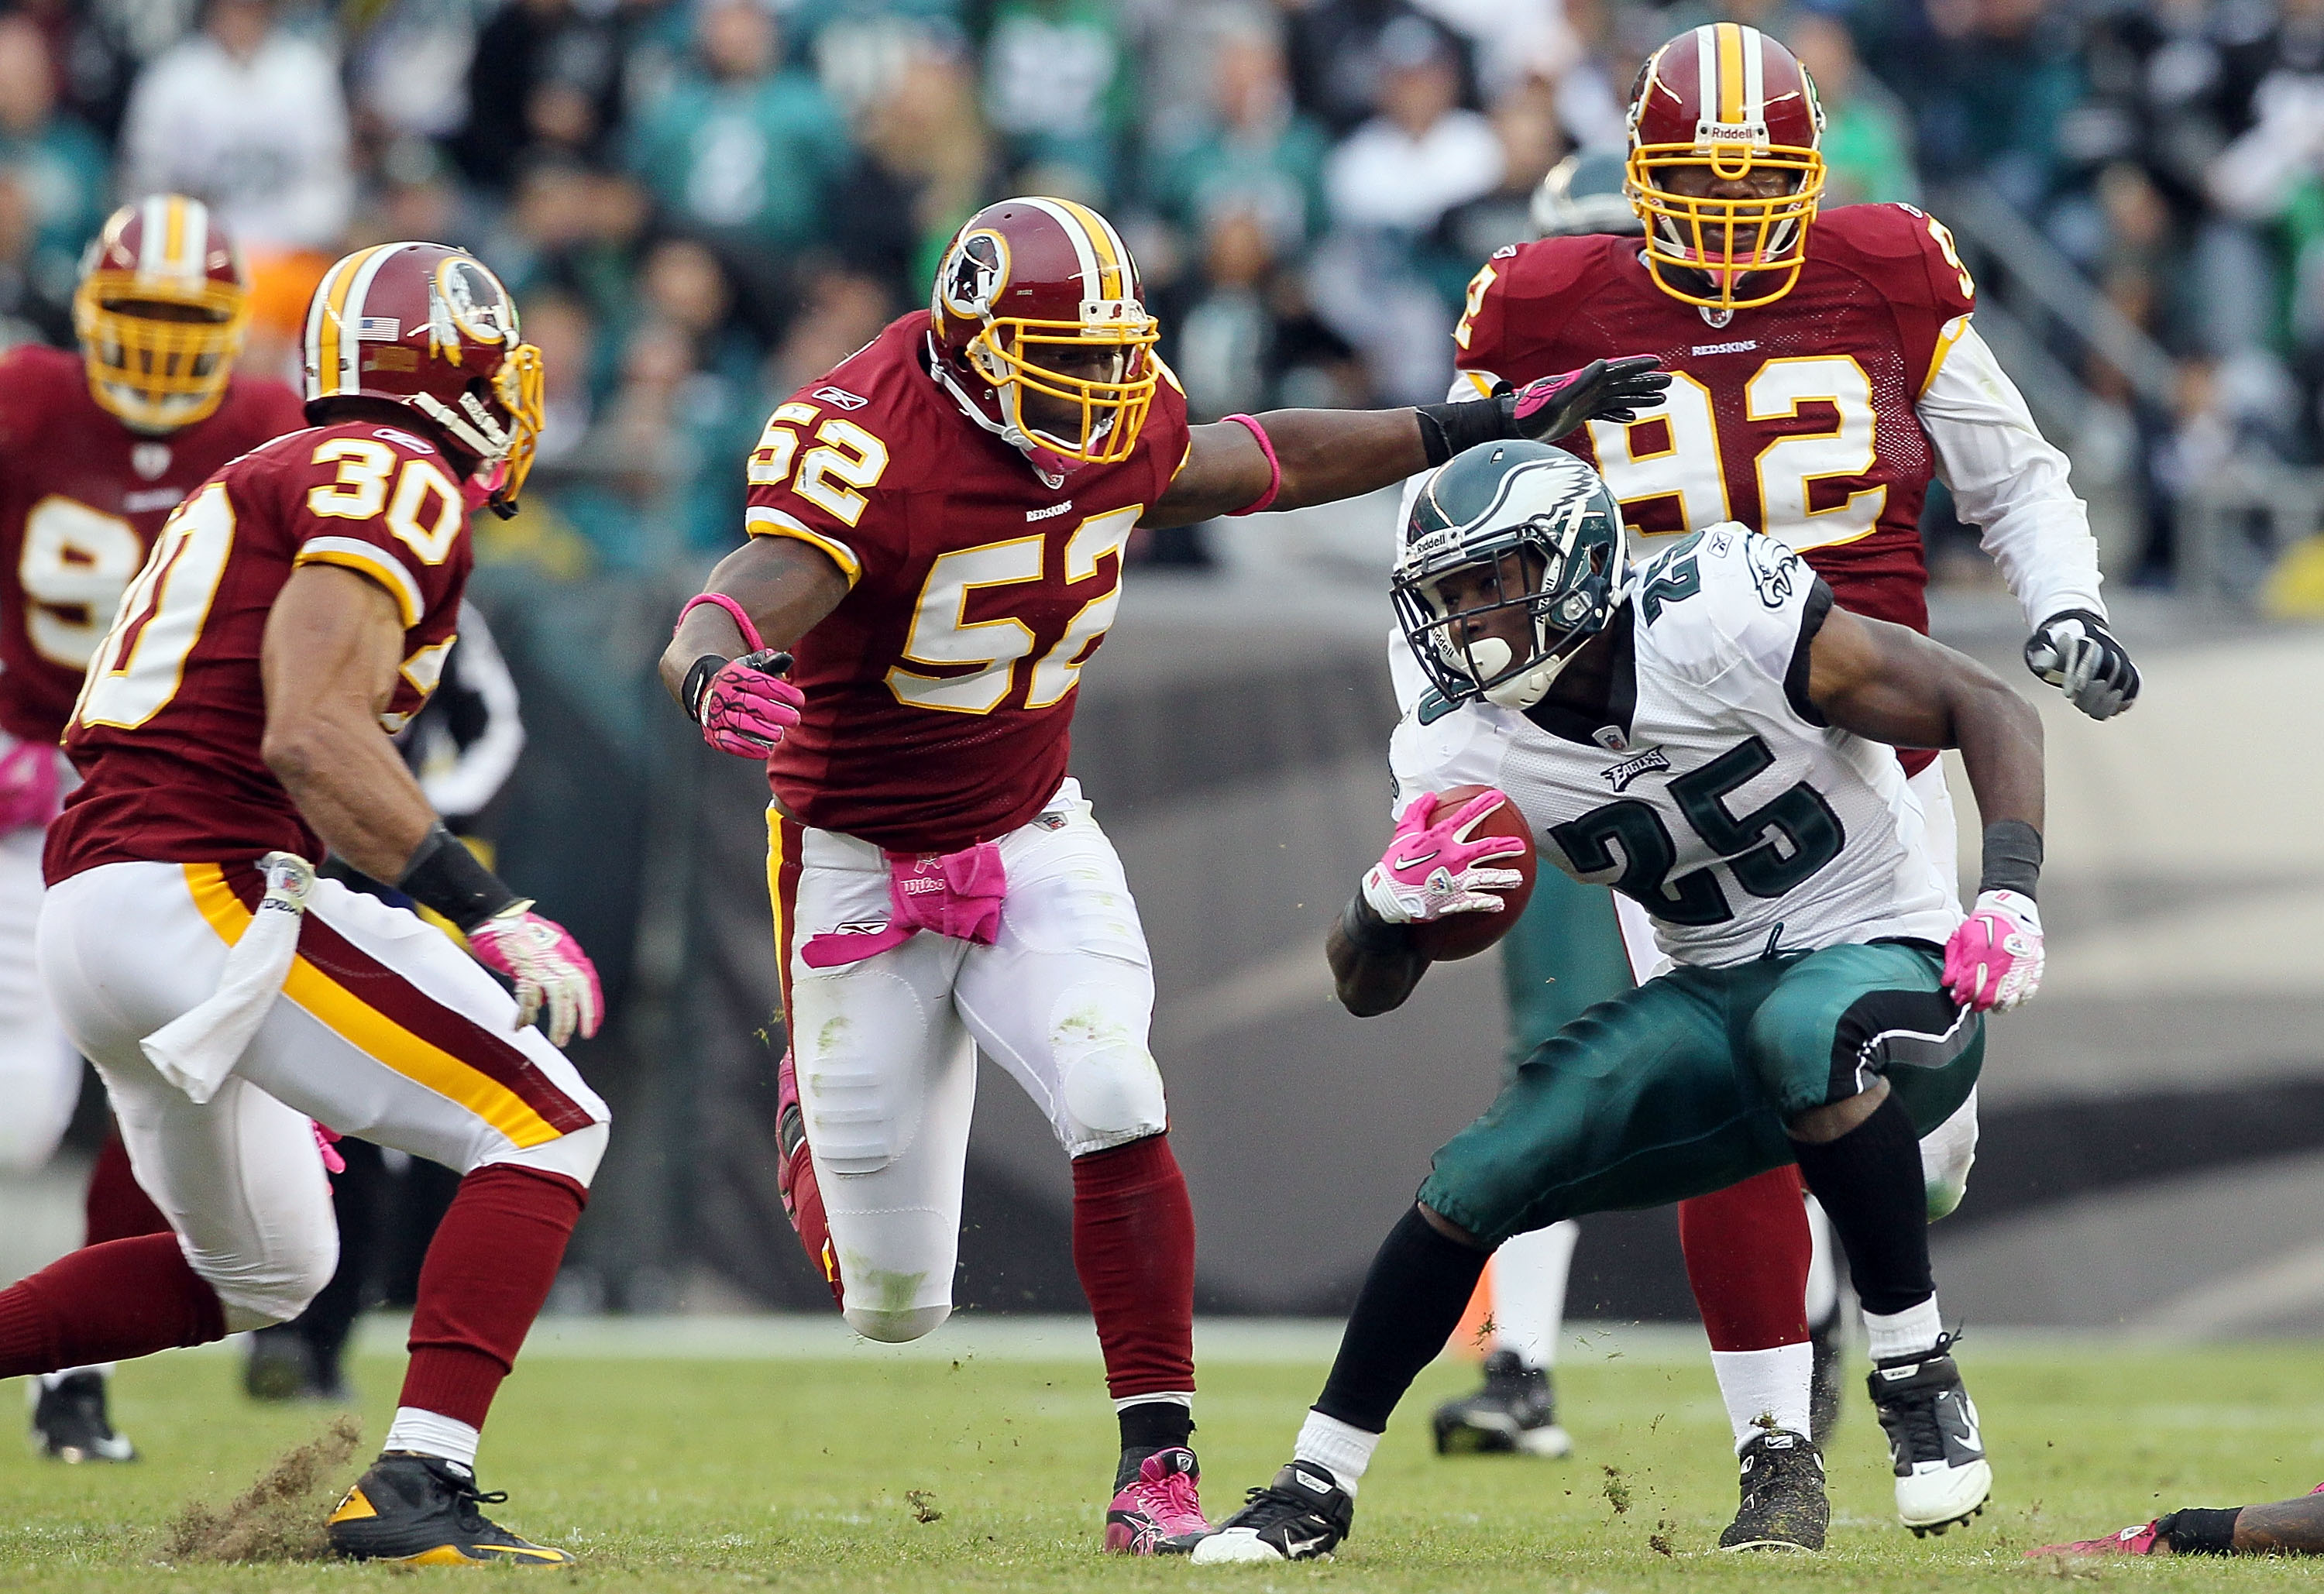 PHILADELPHIA - OCTOBER 03:  LeSean McCoy #25 of the Philadelphia Eagles looks for room to run the ball against Rocky McIntosh #52 of the Washington Redskins on October 3, 2010 at Lincoln Financial Field in Philadelphia, Pennsylvania.  (Photo by Jim McIsaa